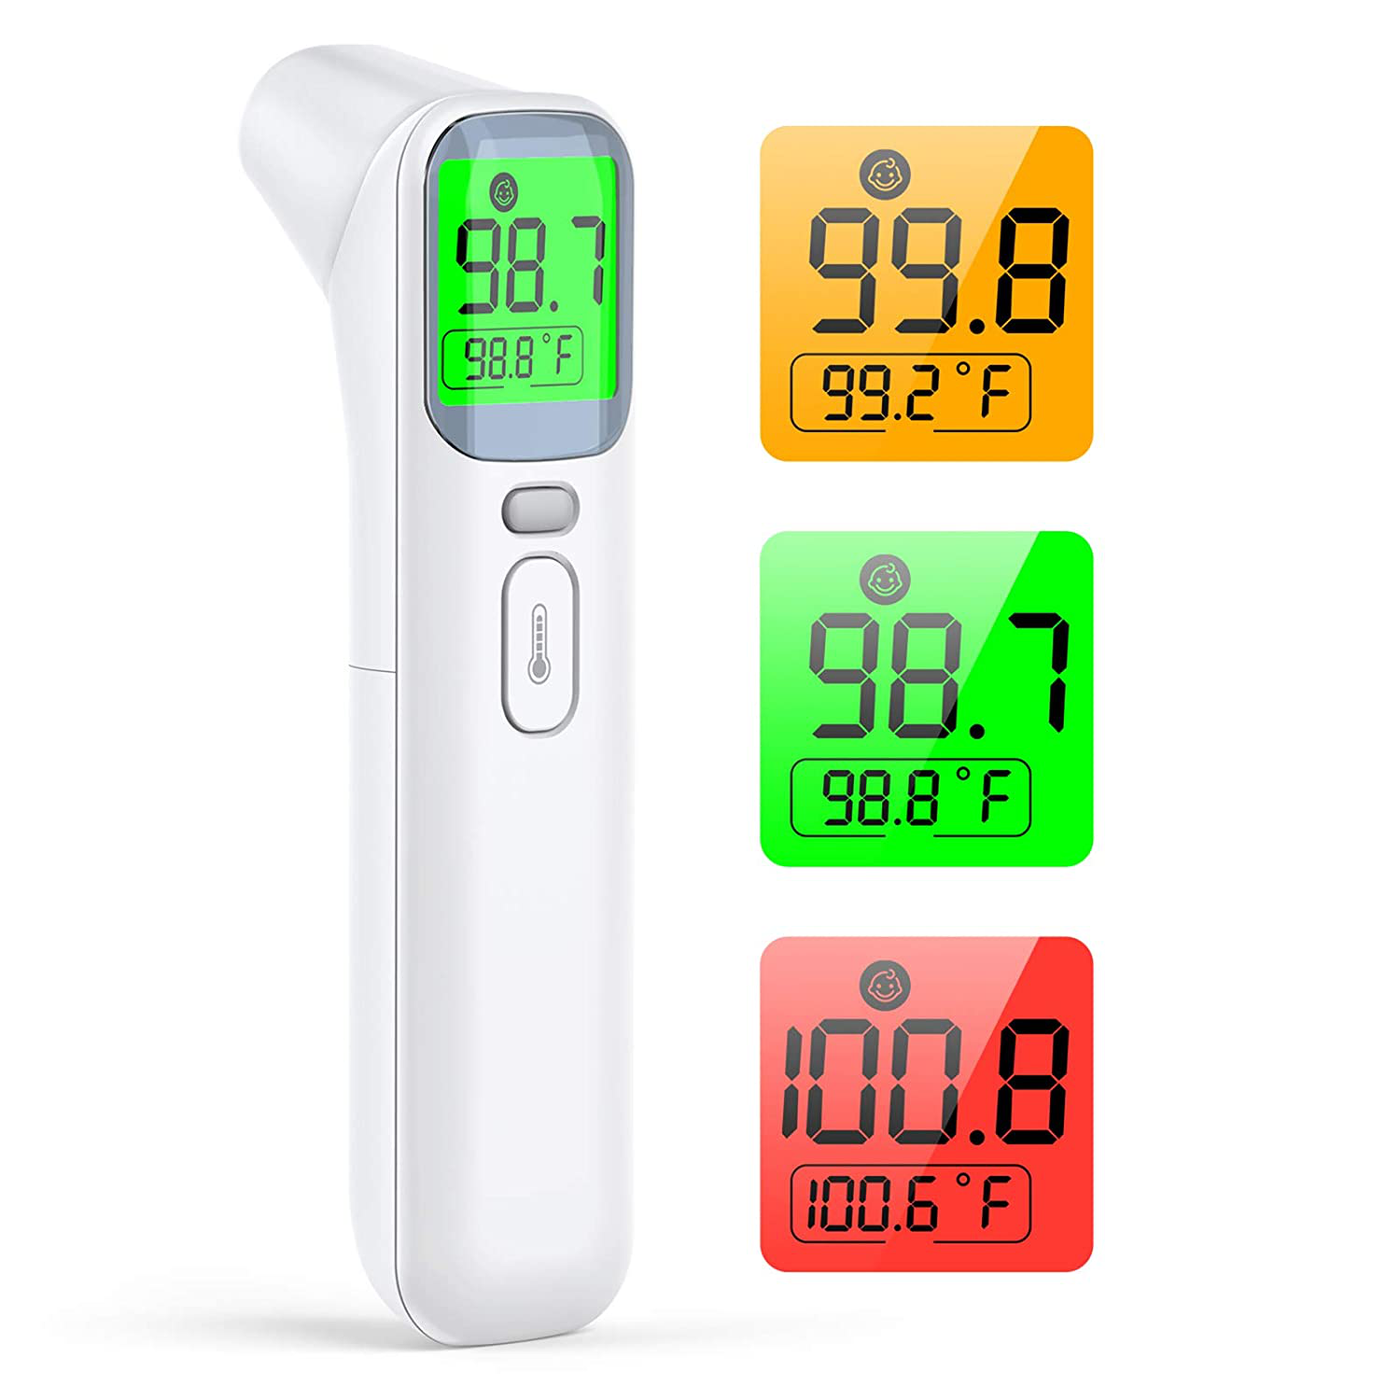 Infrared Thermometer Forehead Ear Thermometer for Fever, KKmier Digital Medical Thermometer No Touch LCD Instant Readings, Memory Function with Color Change Alarm for Adults Baby Kids